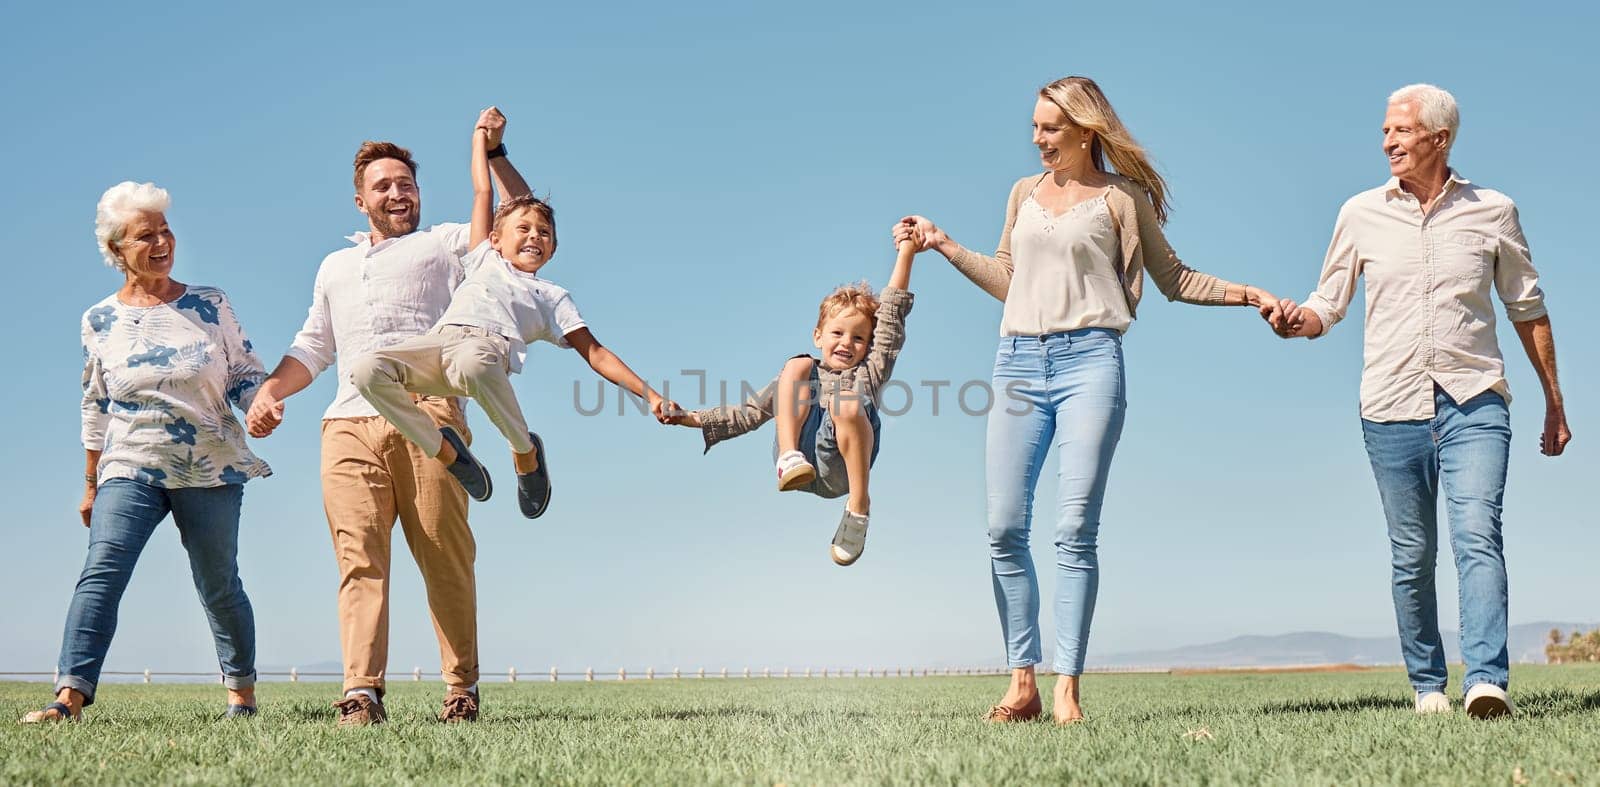 Lift, happy family and summer walk in a field, play and fun in nature together, smile and laugh. Parents, kids and grandparents love enjoying conversation or family time, smile and hold hands outdoor by YuriArcurs